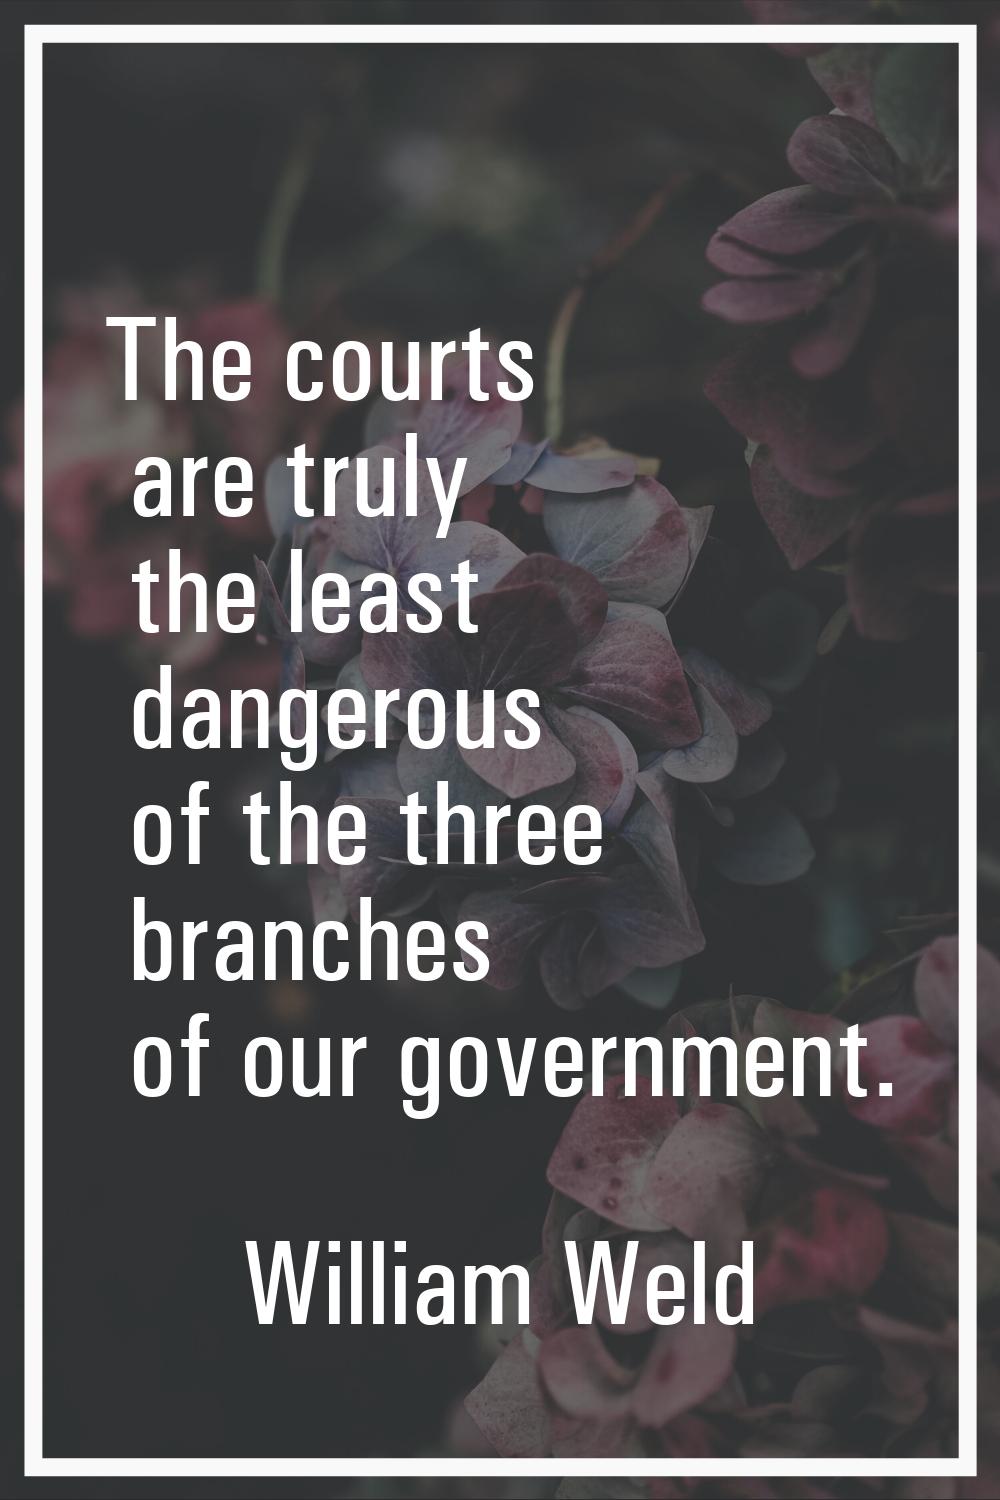 The courts are truly the least dangerous of the three branches of our government.